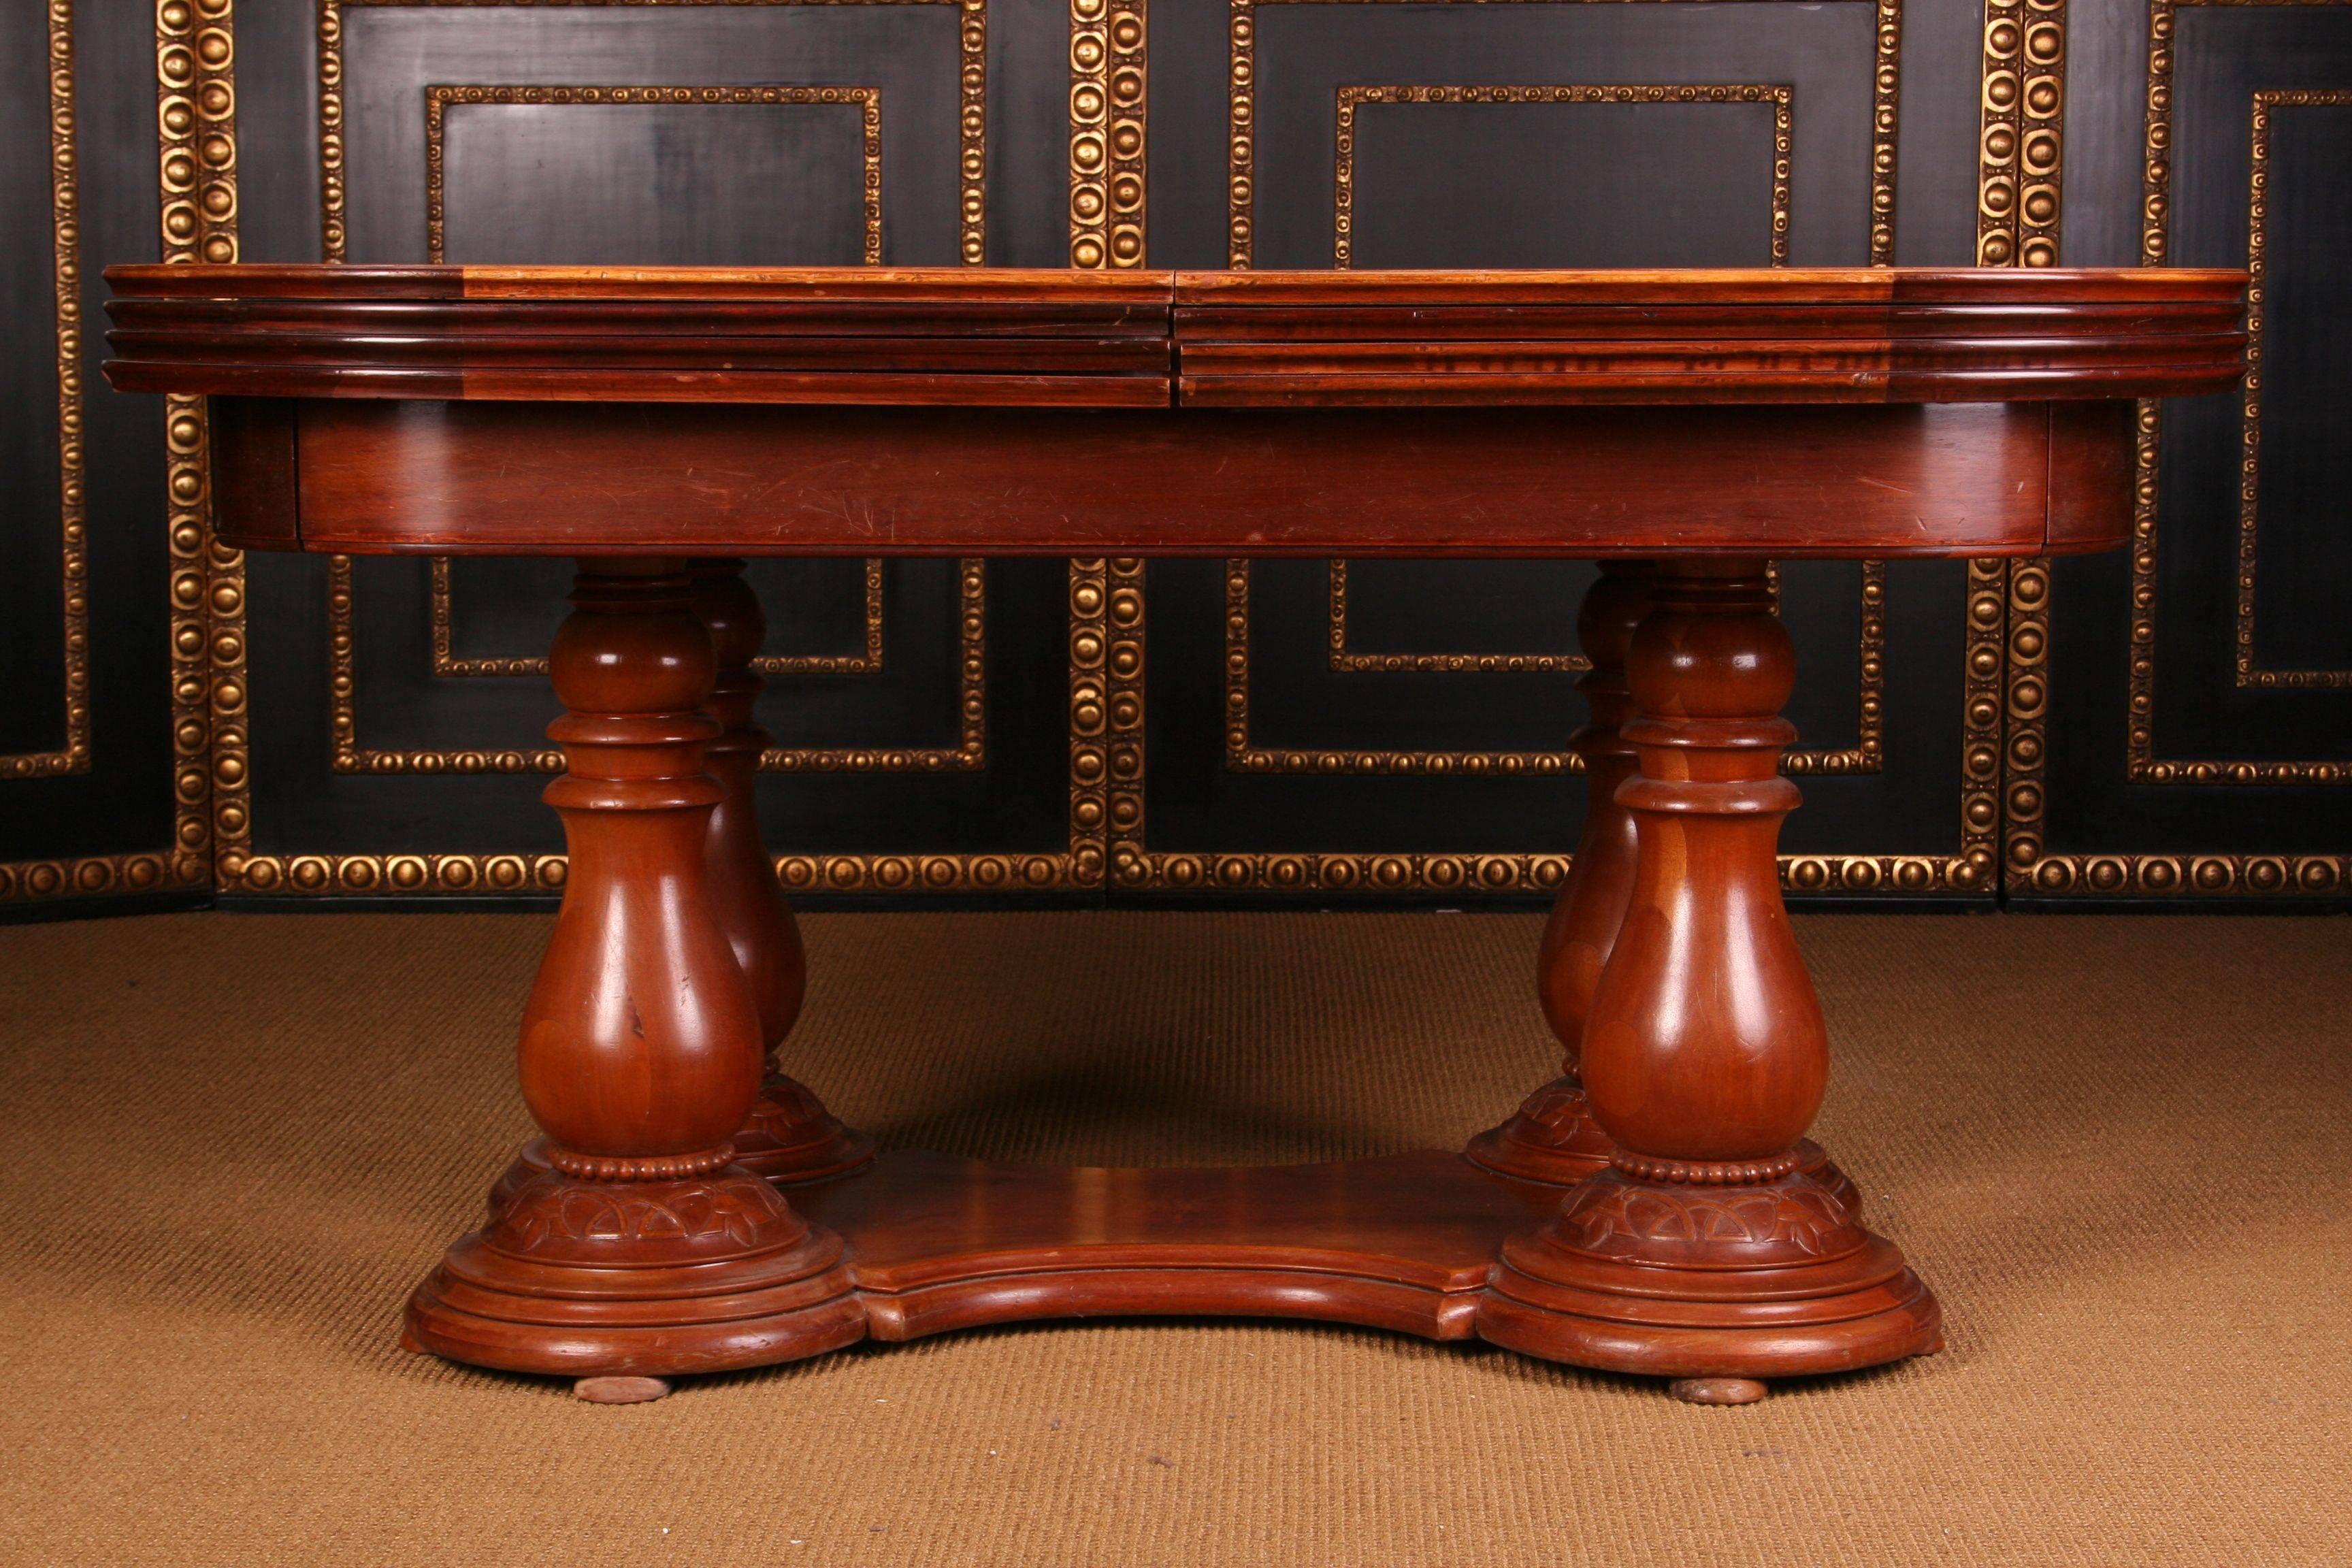 A monumental noble and rare extension table, circa 1850.
Pyramids mahogany and solid walnut. The cambered frame is connected to four baluster-shaped columns below a wide corresponding storage compartment. This large extension table is characterized